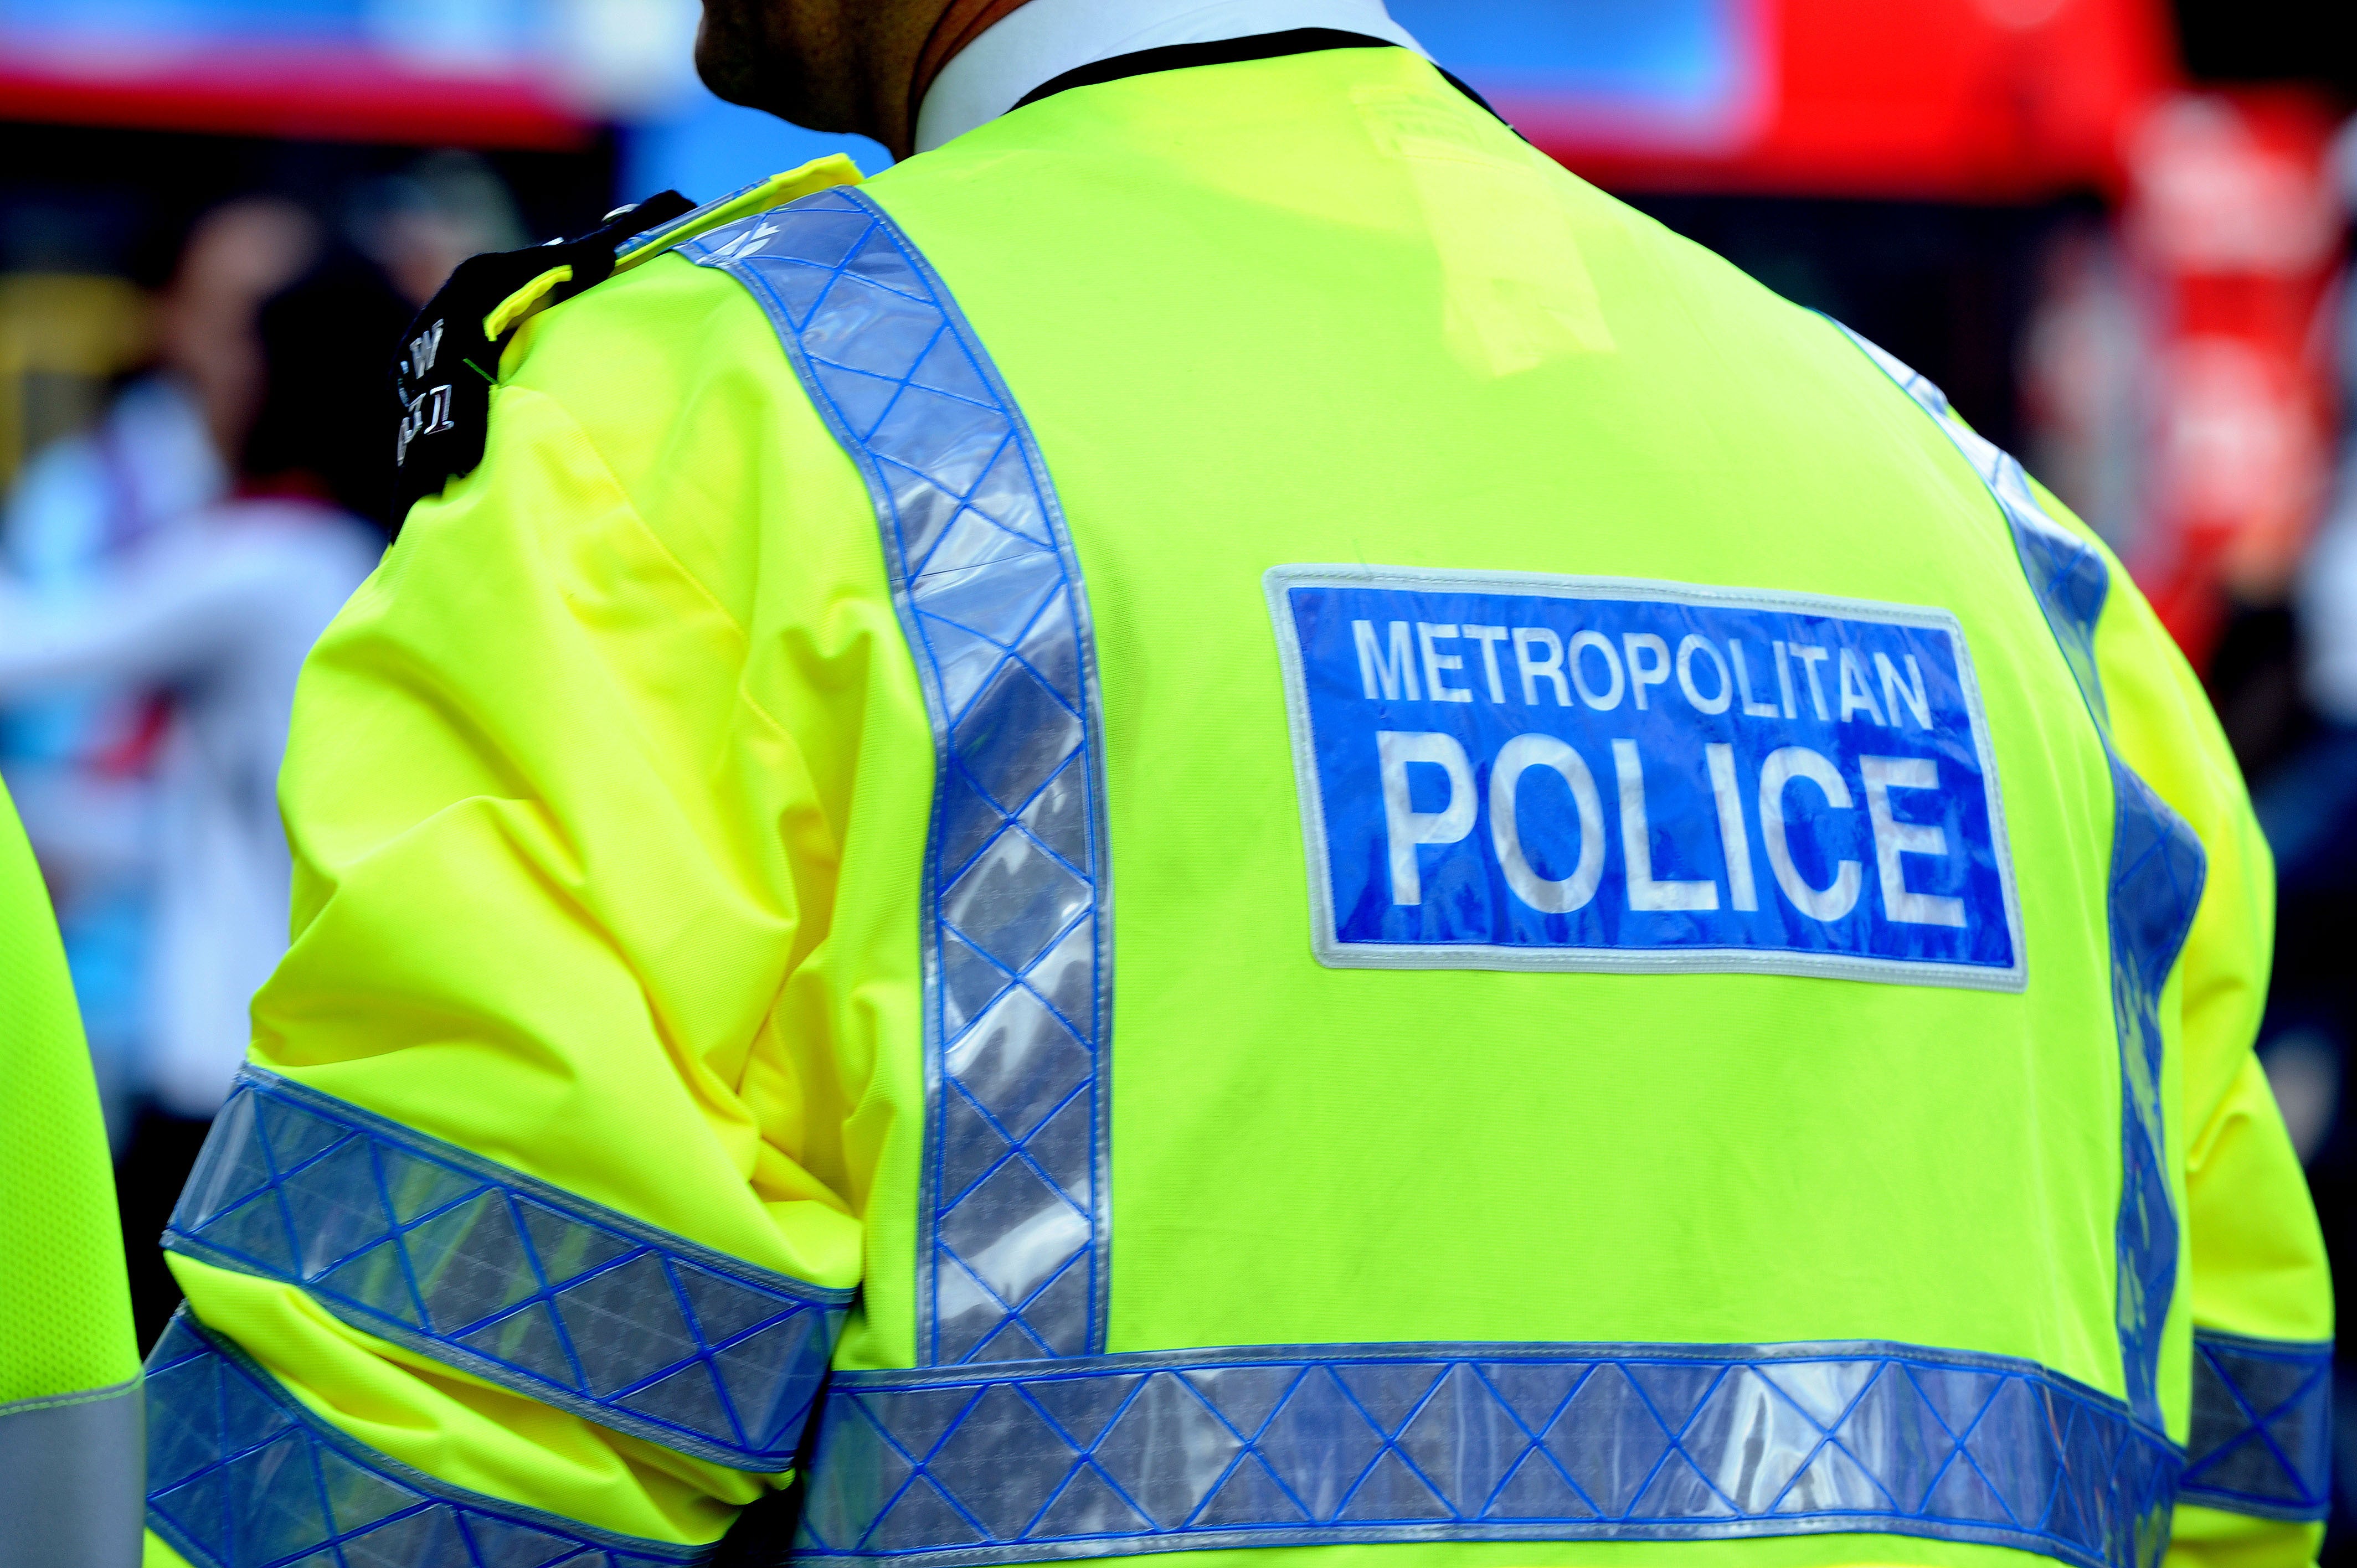 A Metropolitan Police constable tasered a 10-year-old girl twice after she threatened her mother with garden shears and hit her with a hammer, a misconduct hearing has been told